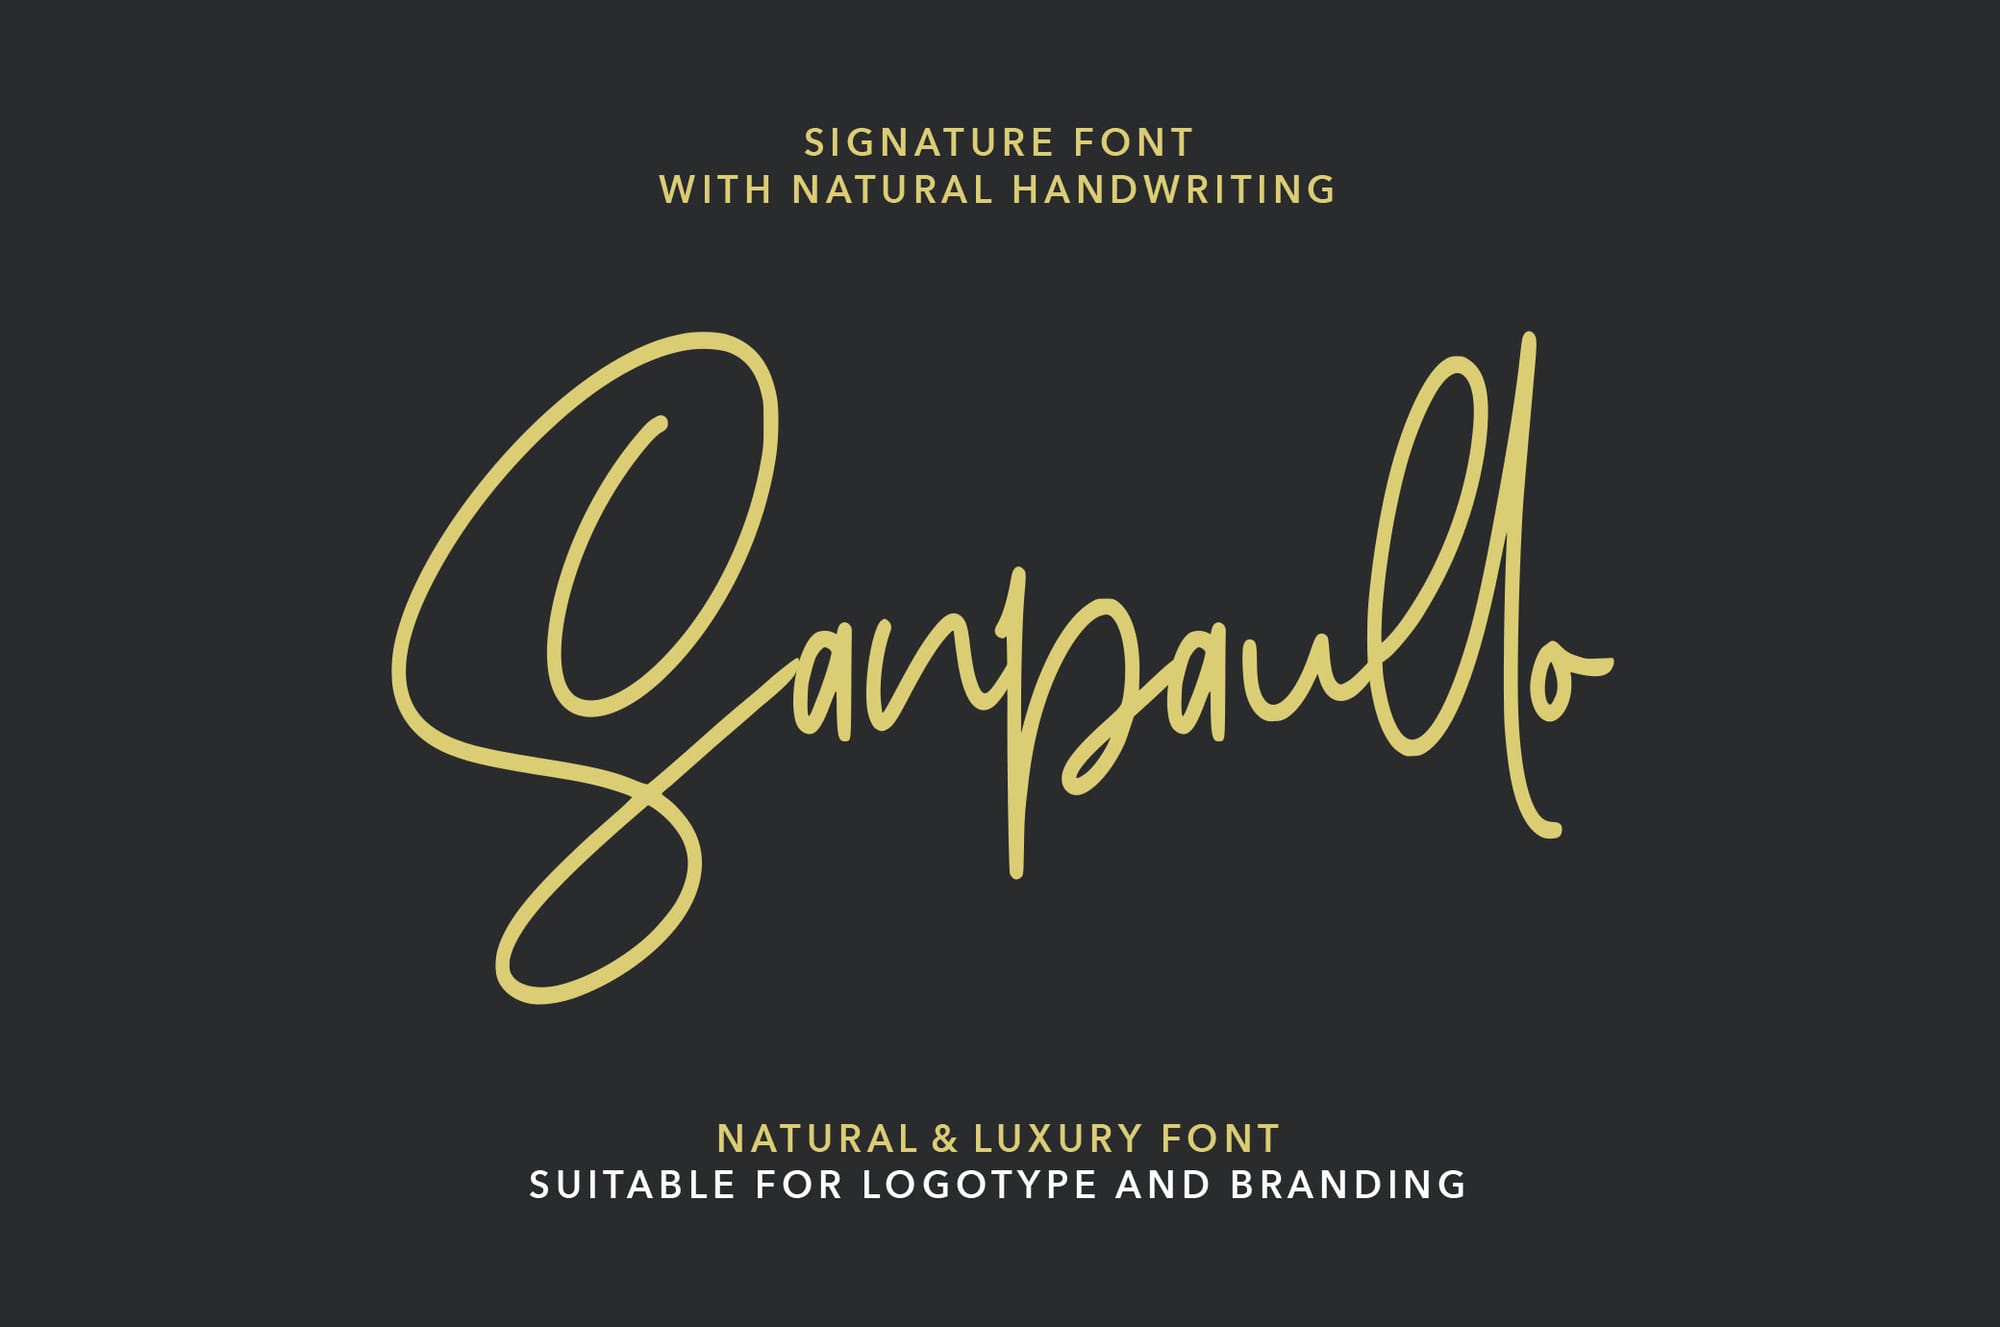 A natural and luxury signature font